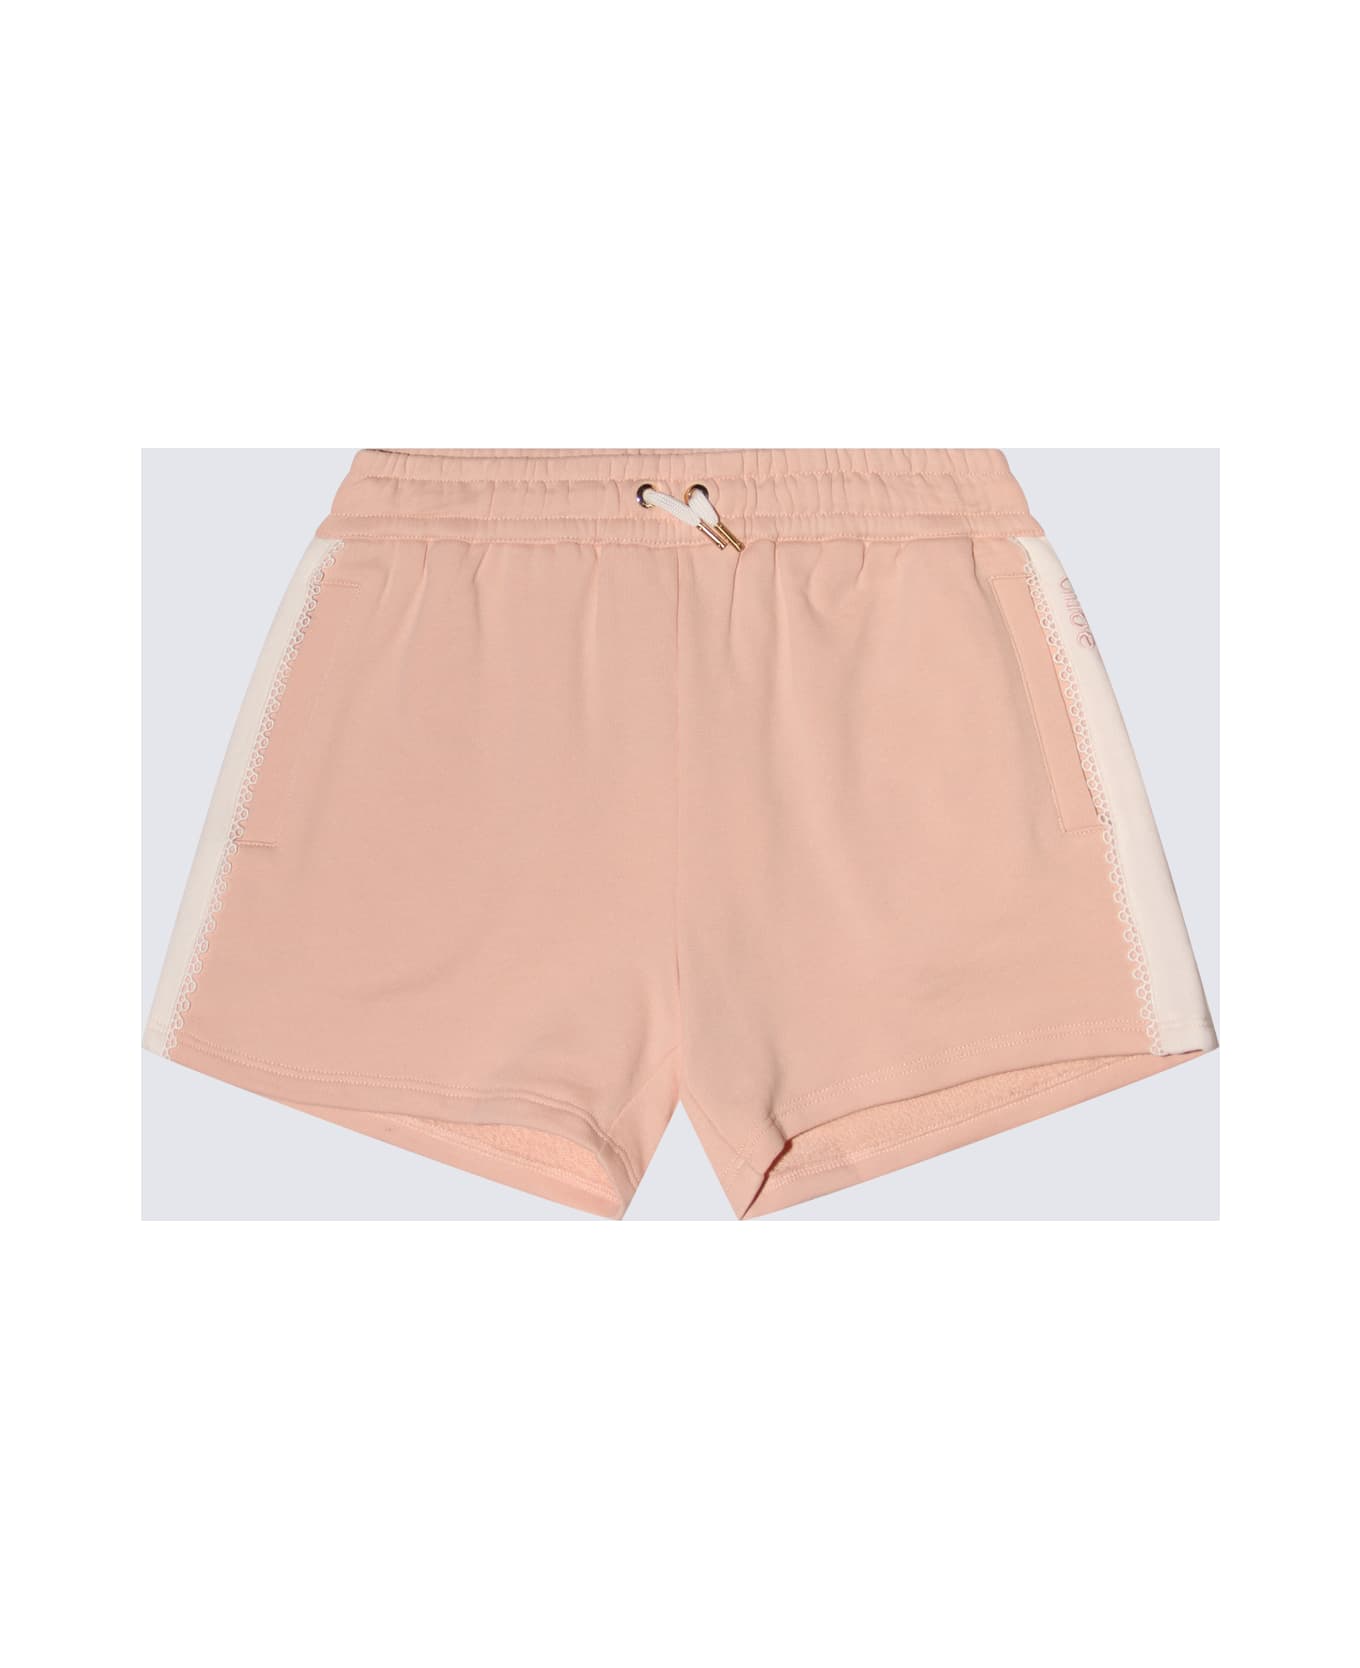 Chloé Washed Pink Cotton Shorts - WASHED PINK